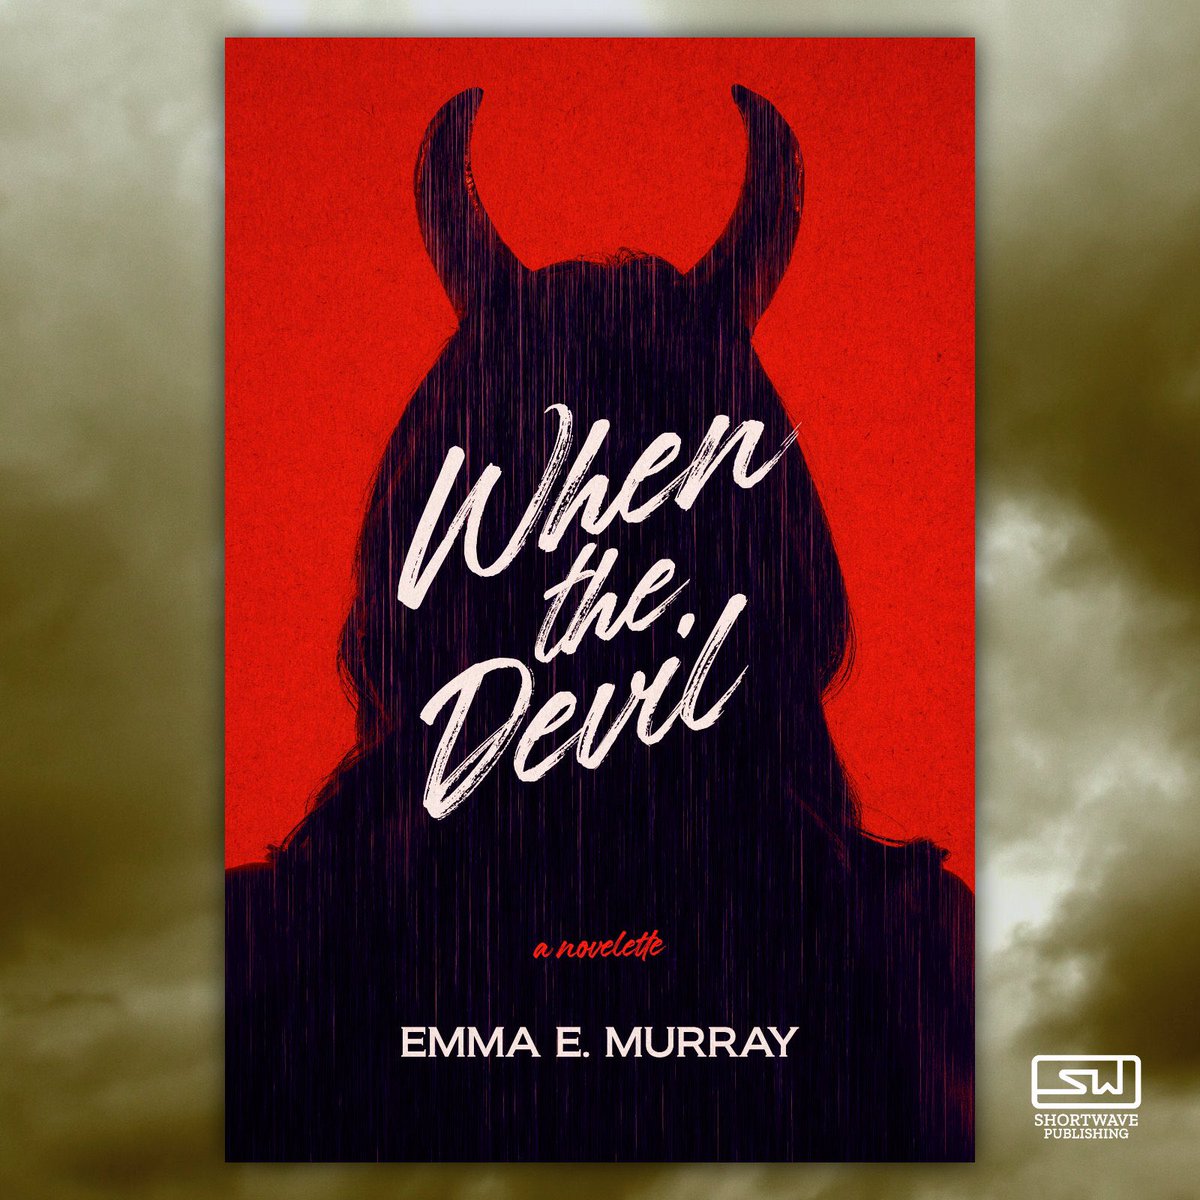 TODAY’S THE DAY!!!! 🥳🖤😈 I’m so excited to have this sapphic southern gothic novelette out in the world! Thank you to @ShortwaveBooks for making it a reality 🖤 And if you haven’t ordered yours yet, today is a good day to pick it up 😈🌦️🌪️